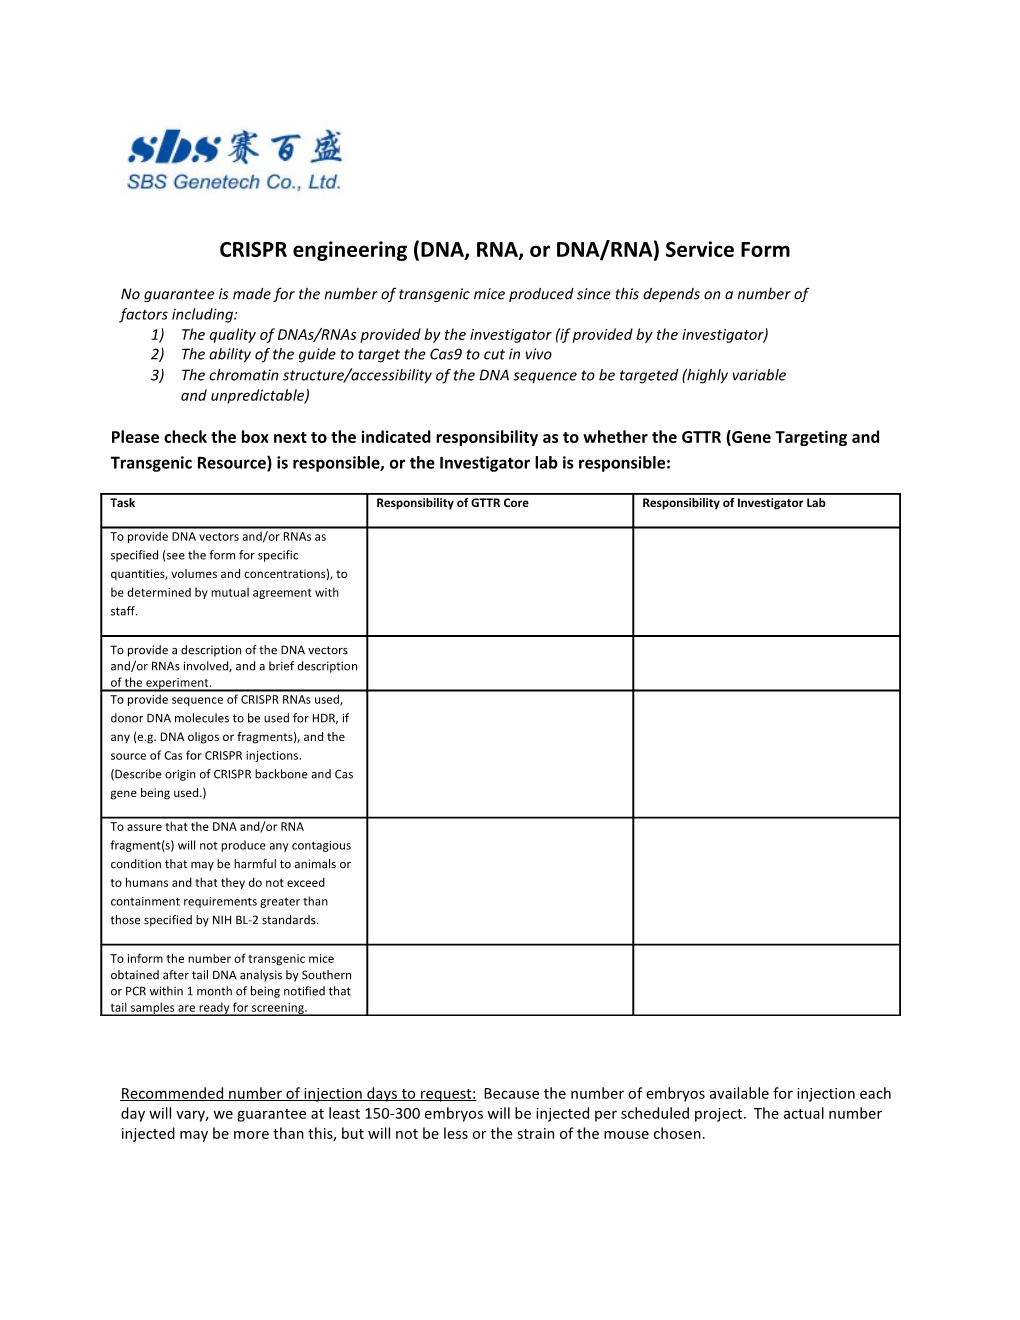 CRISPR Engineering (DNA, RNA, Or DNA/RNA) Microinjection Service Form